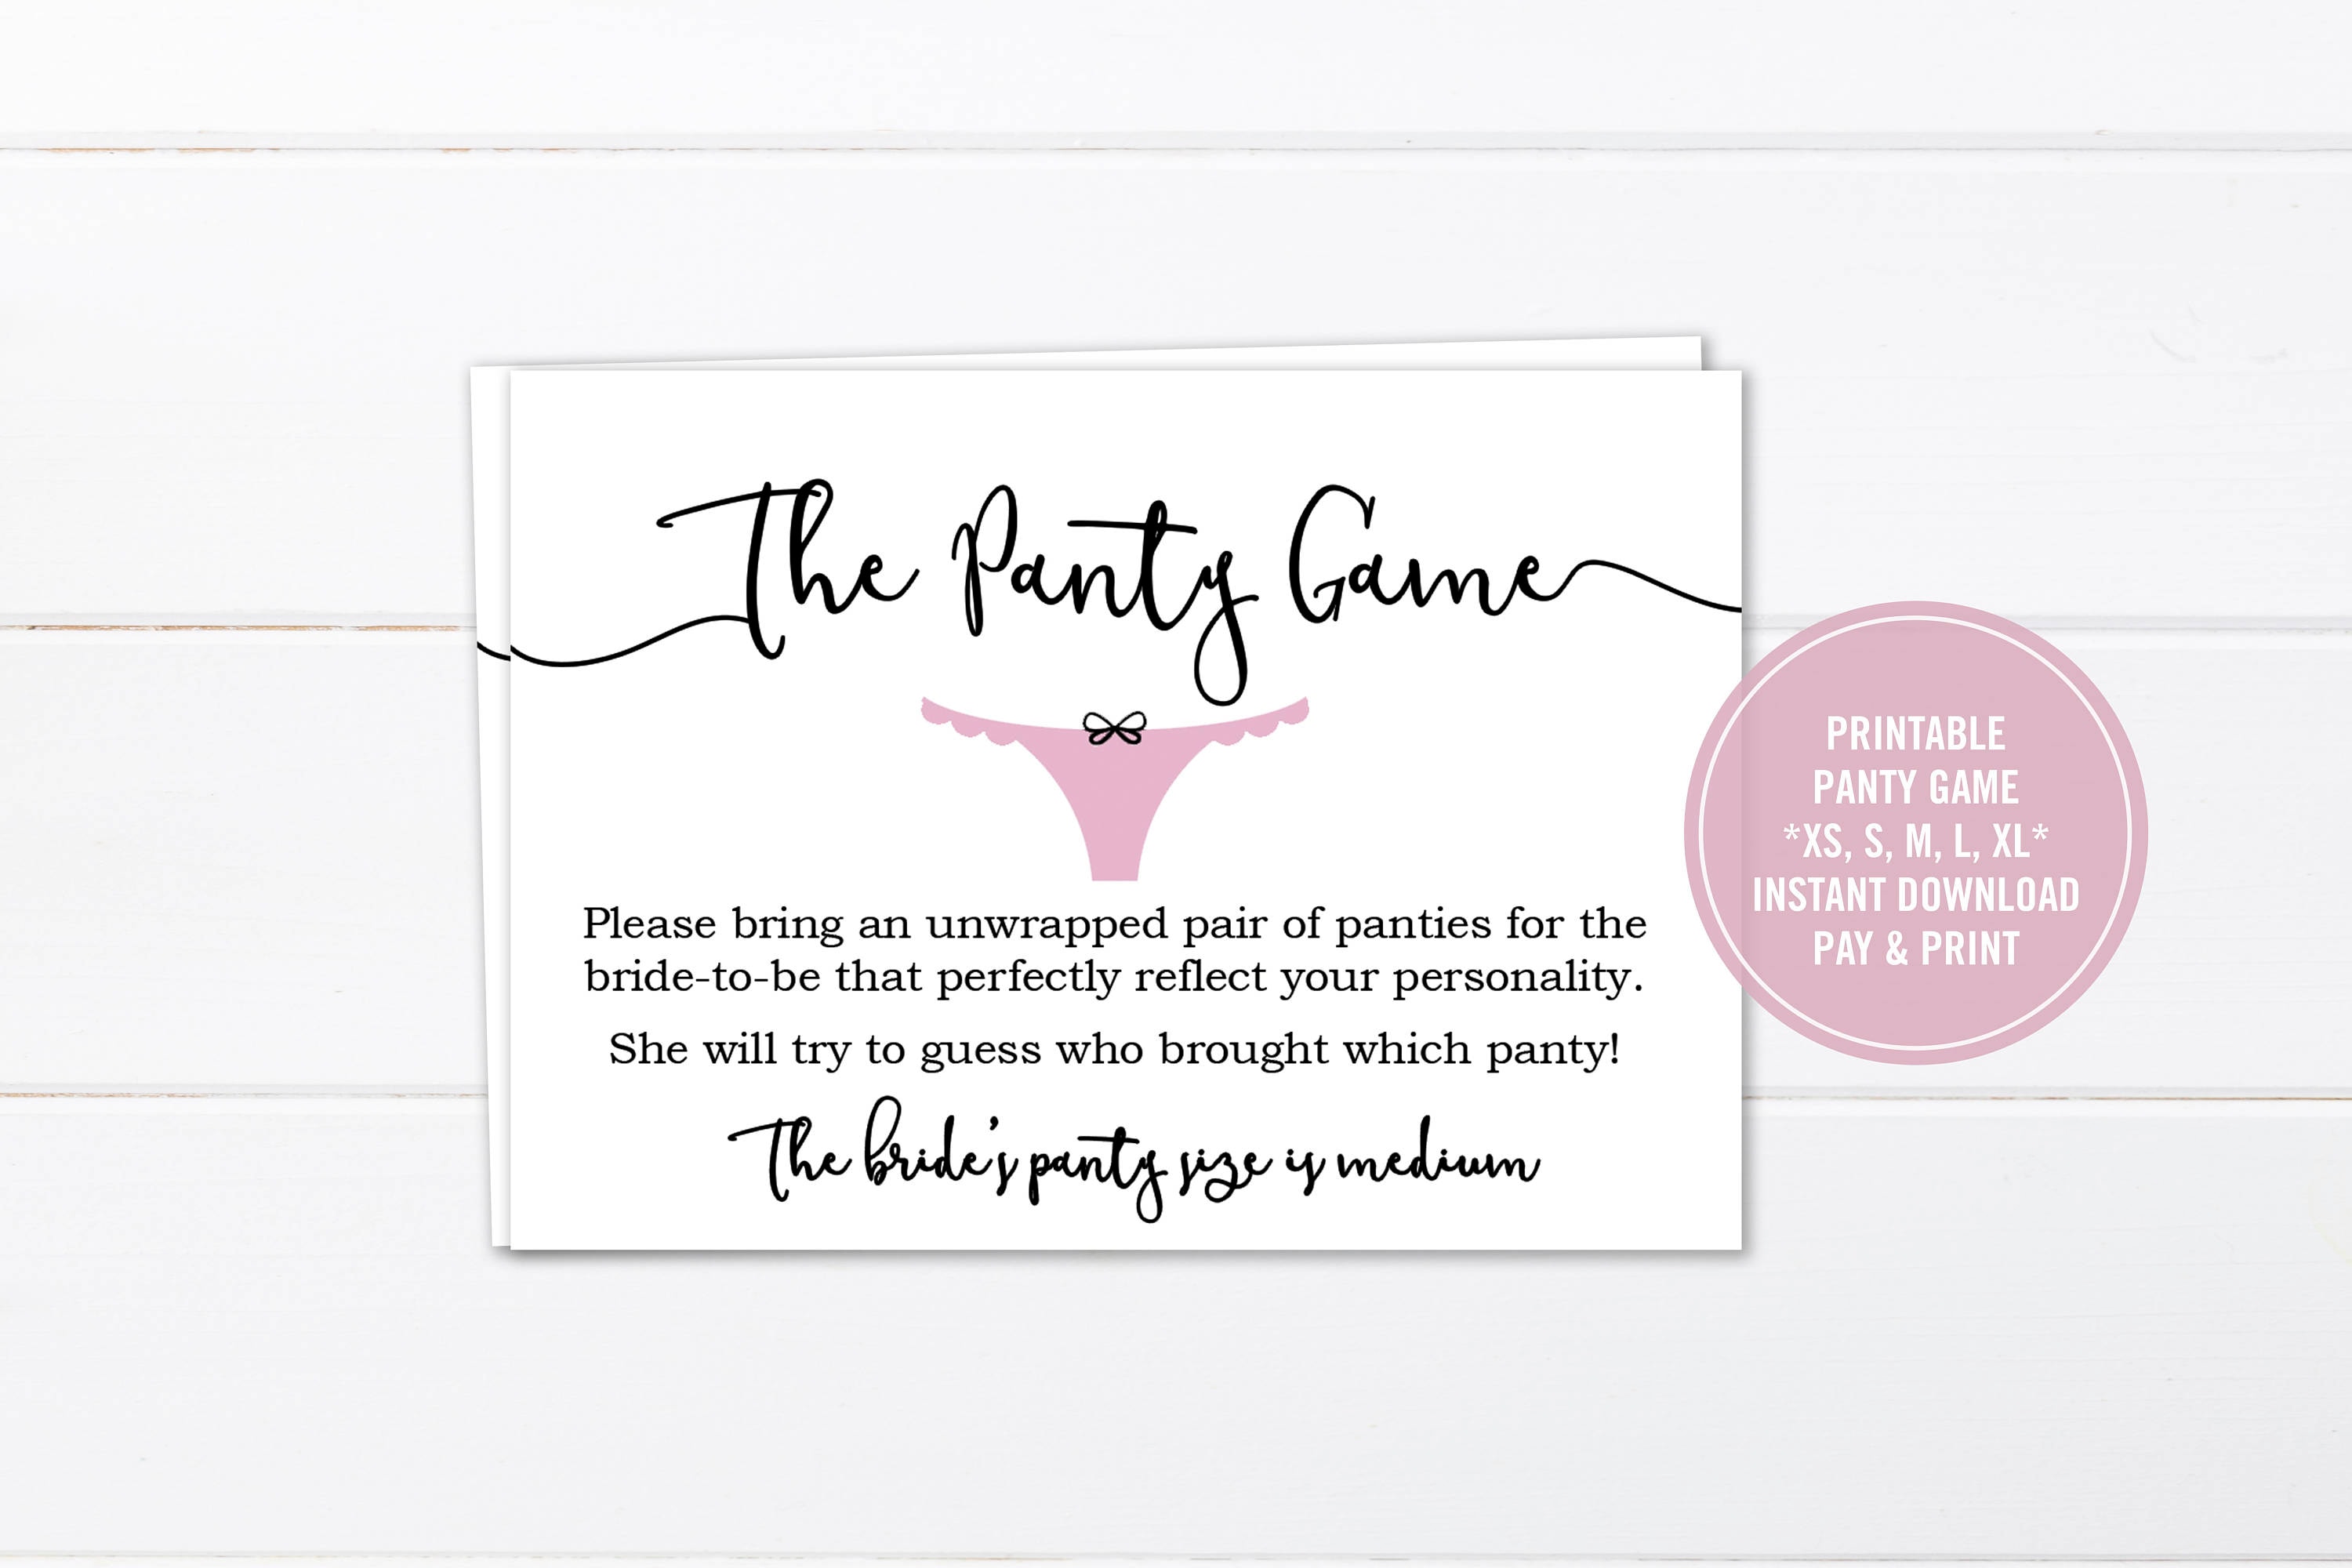 Panty Game Drop Your Panties Bridal Shower Games Bachelorette Party Game  Lingerie Shower Party Printable Wedding DIGITAL FILES -  Canada